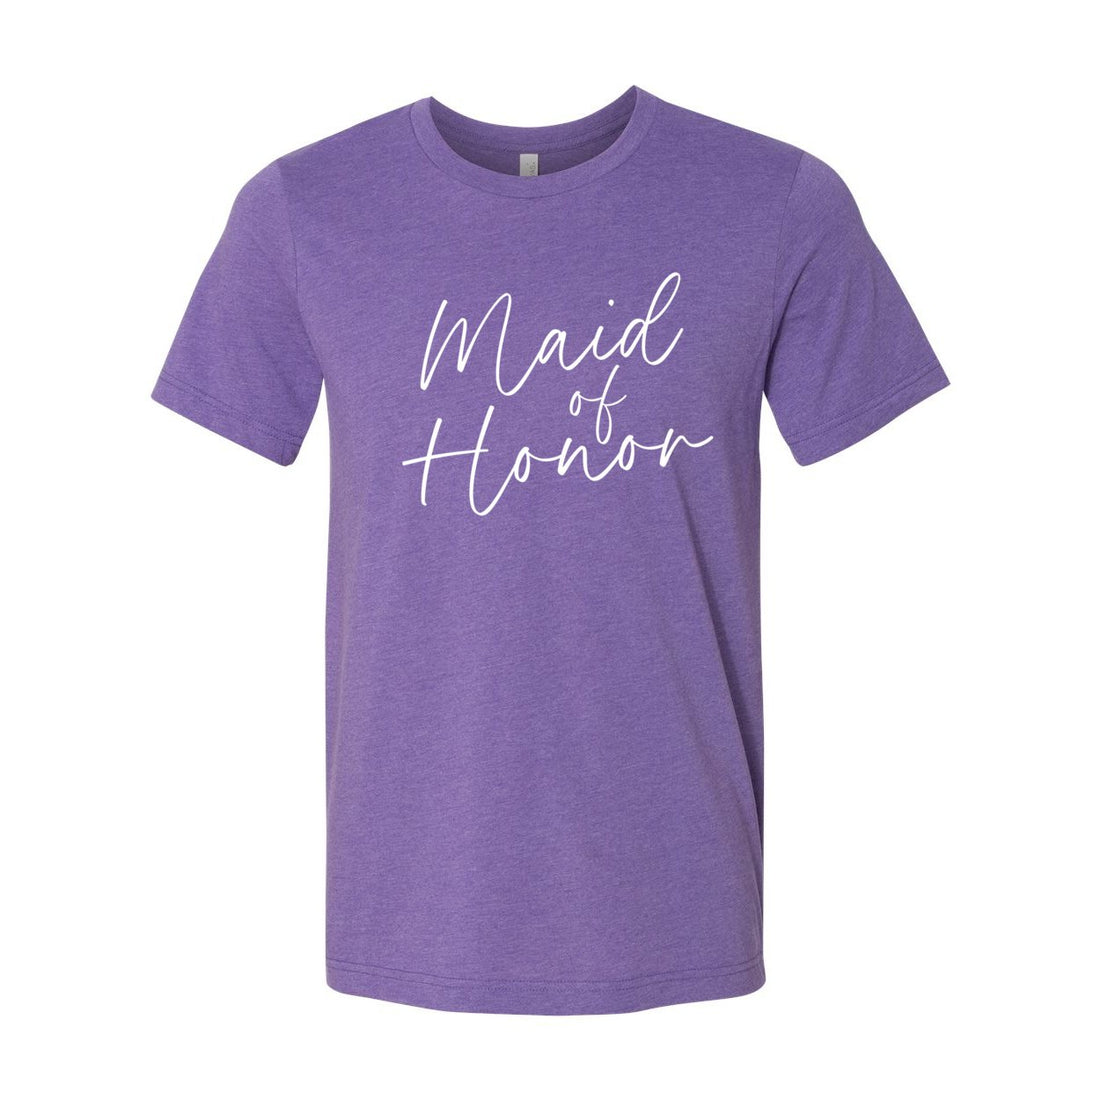 #9 Signature Maid of Honor Jersey Tee - T-Shirts - Positively Sassy - #9 Signature Maid of Honor Jersey Tee